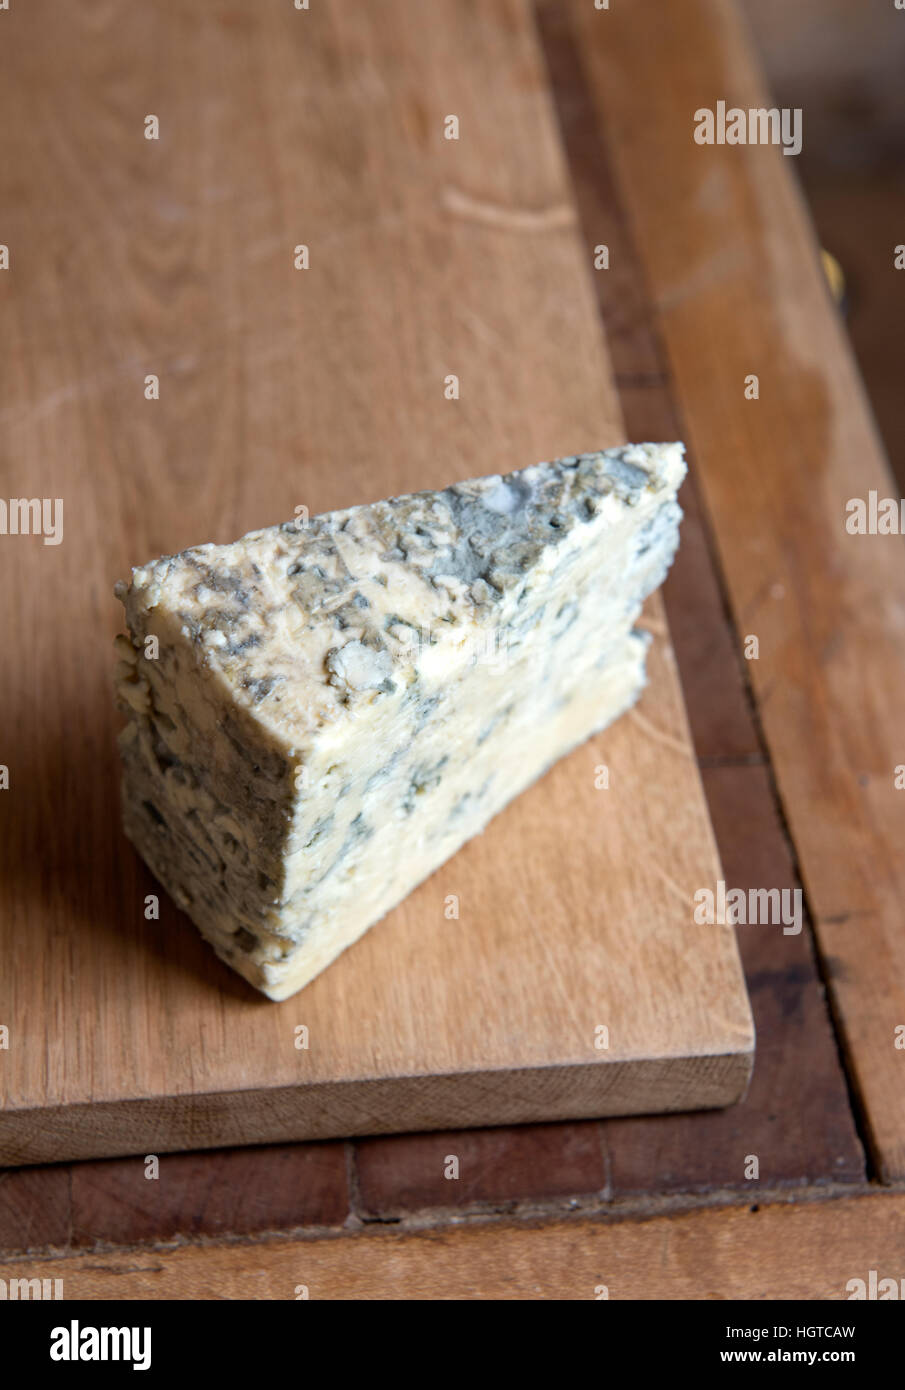 A wedge of English Blue cheese Stock Photo